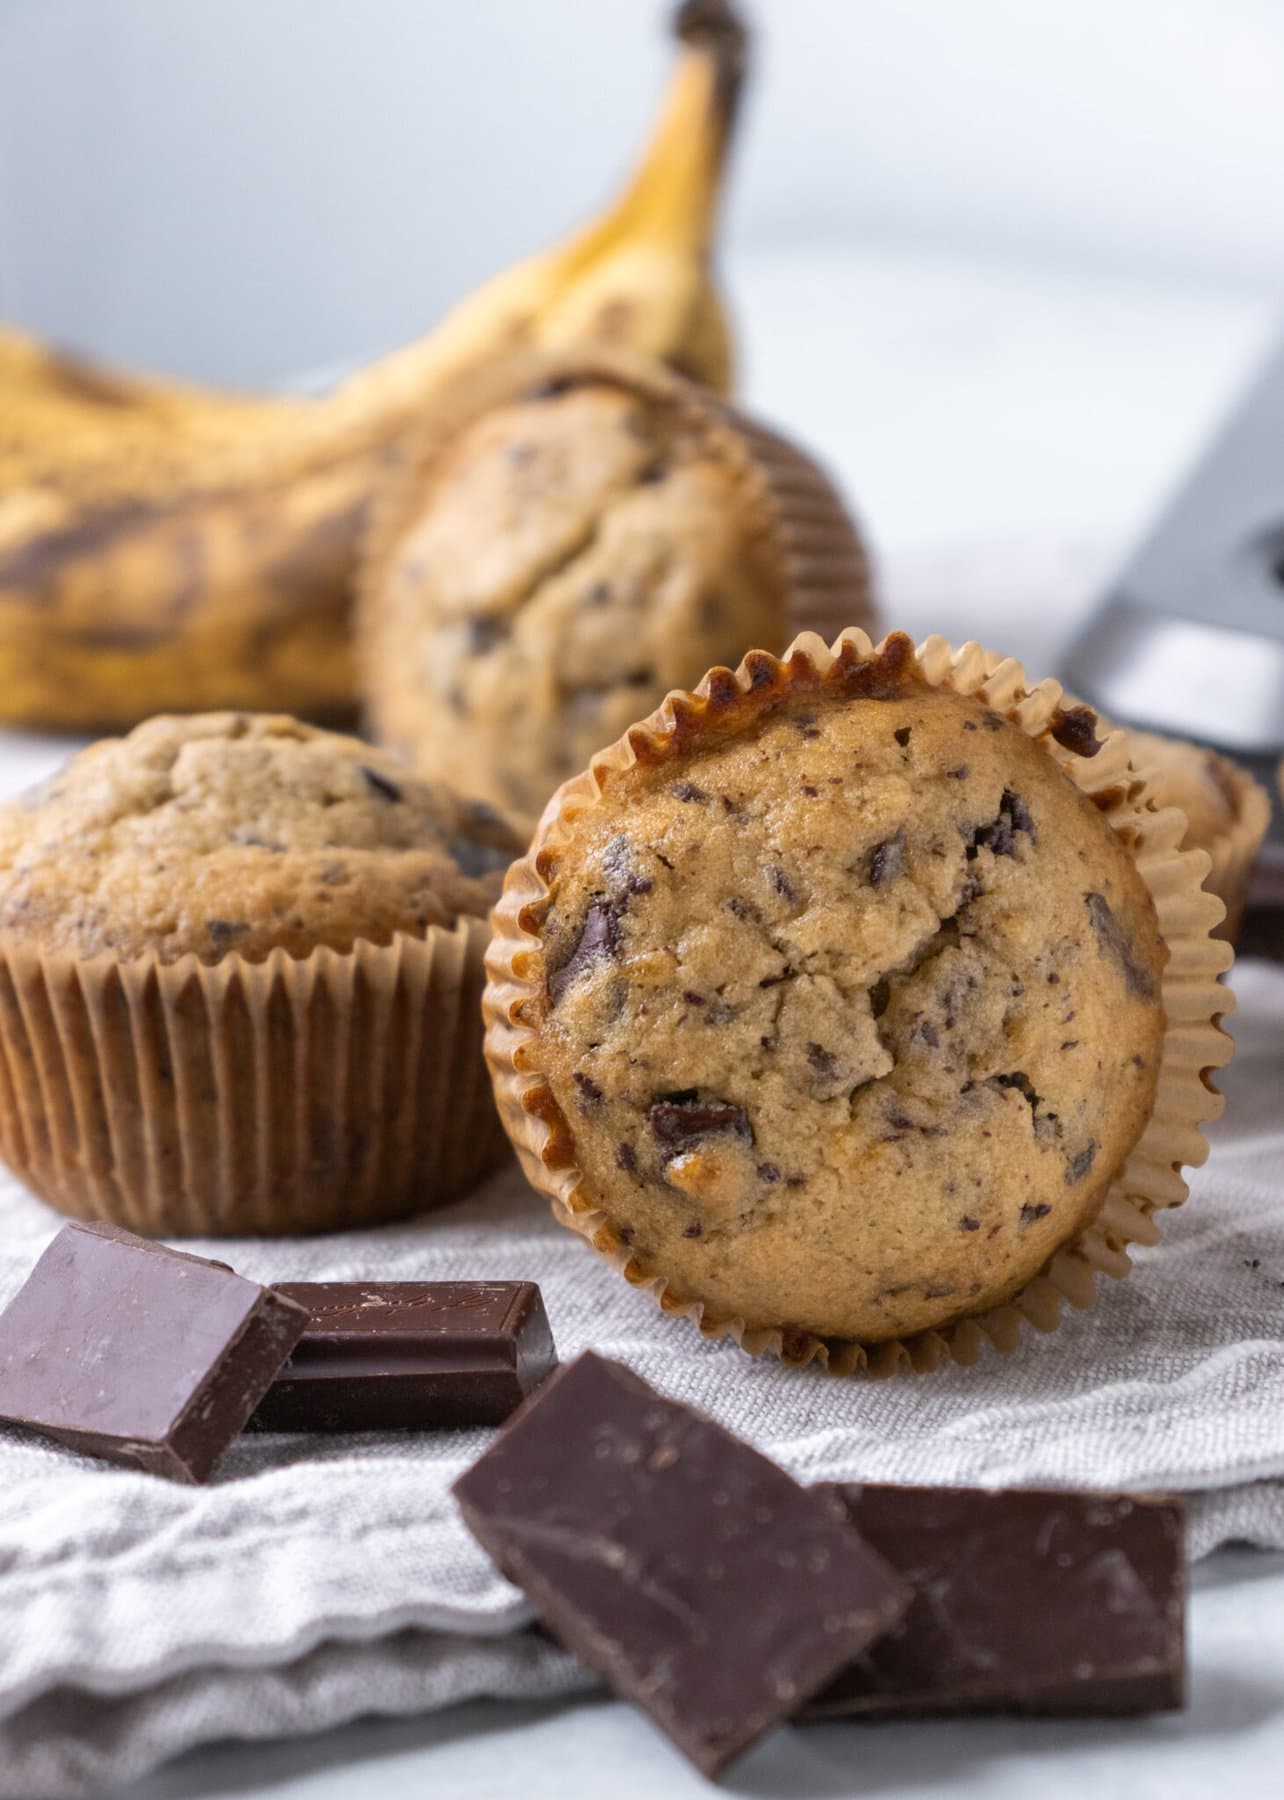 The Chocolate chip Banana Muffins with chocolate pieces on the side.